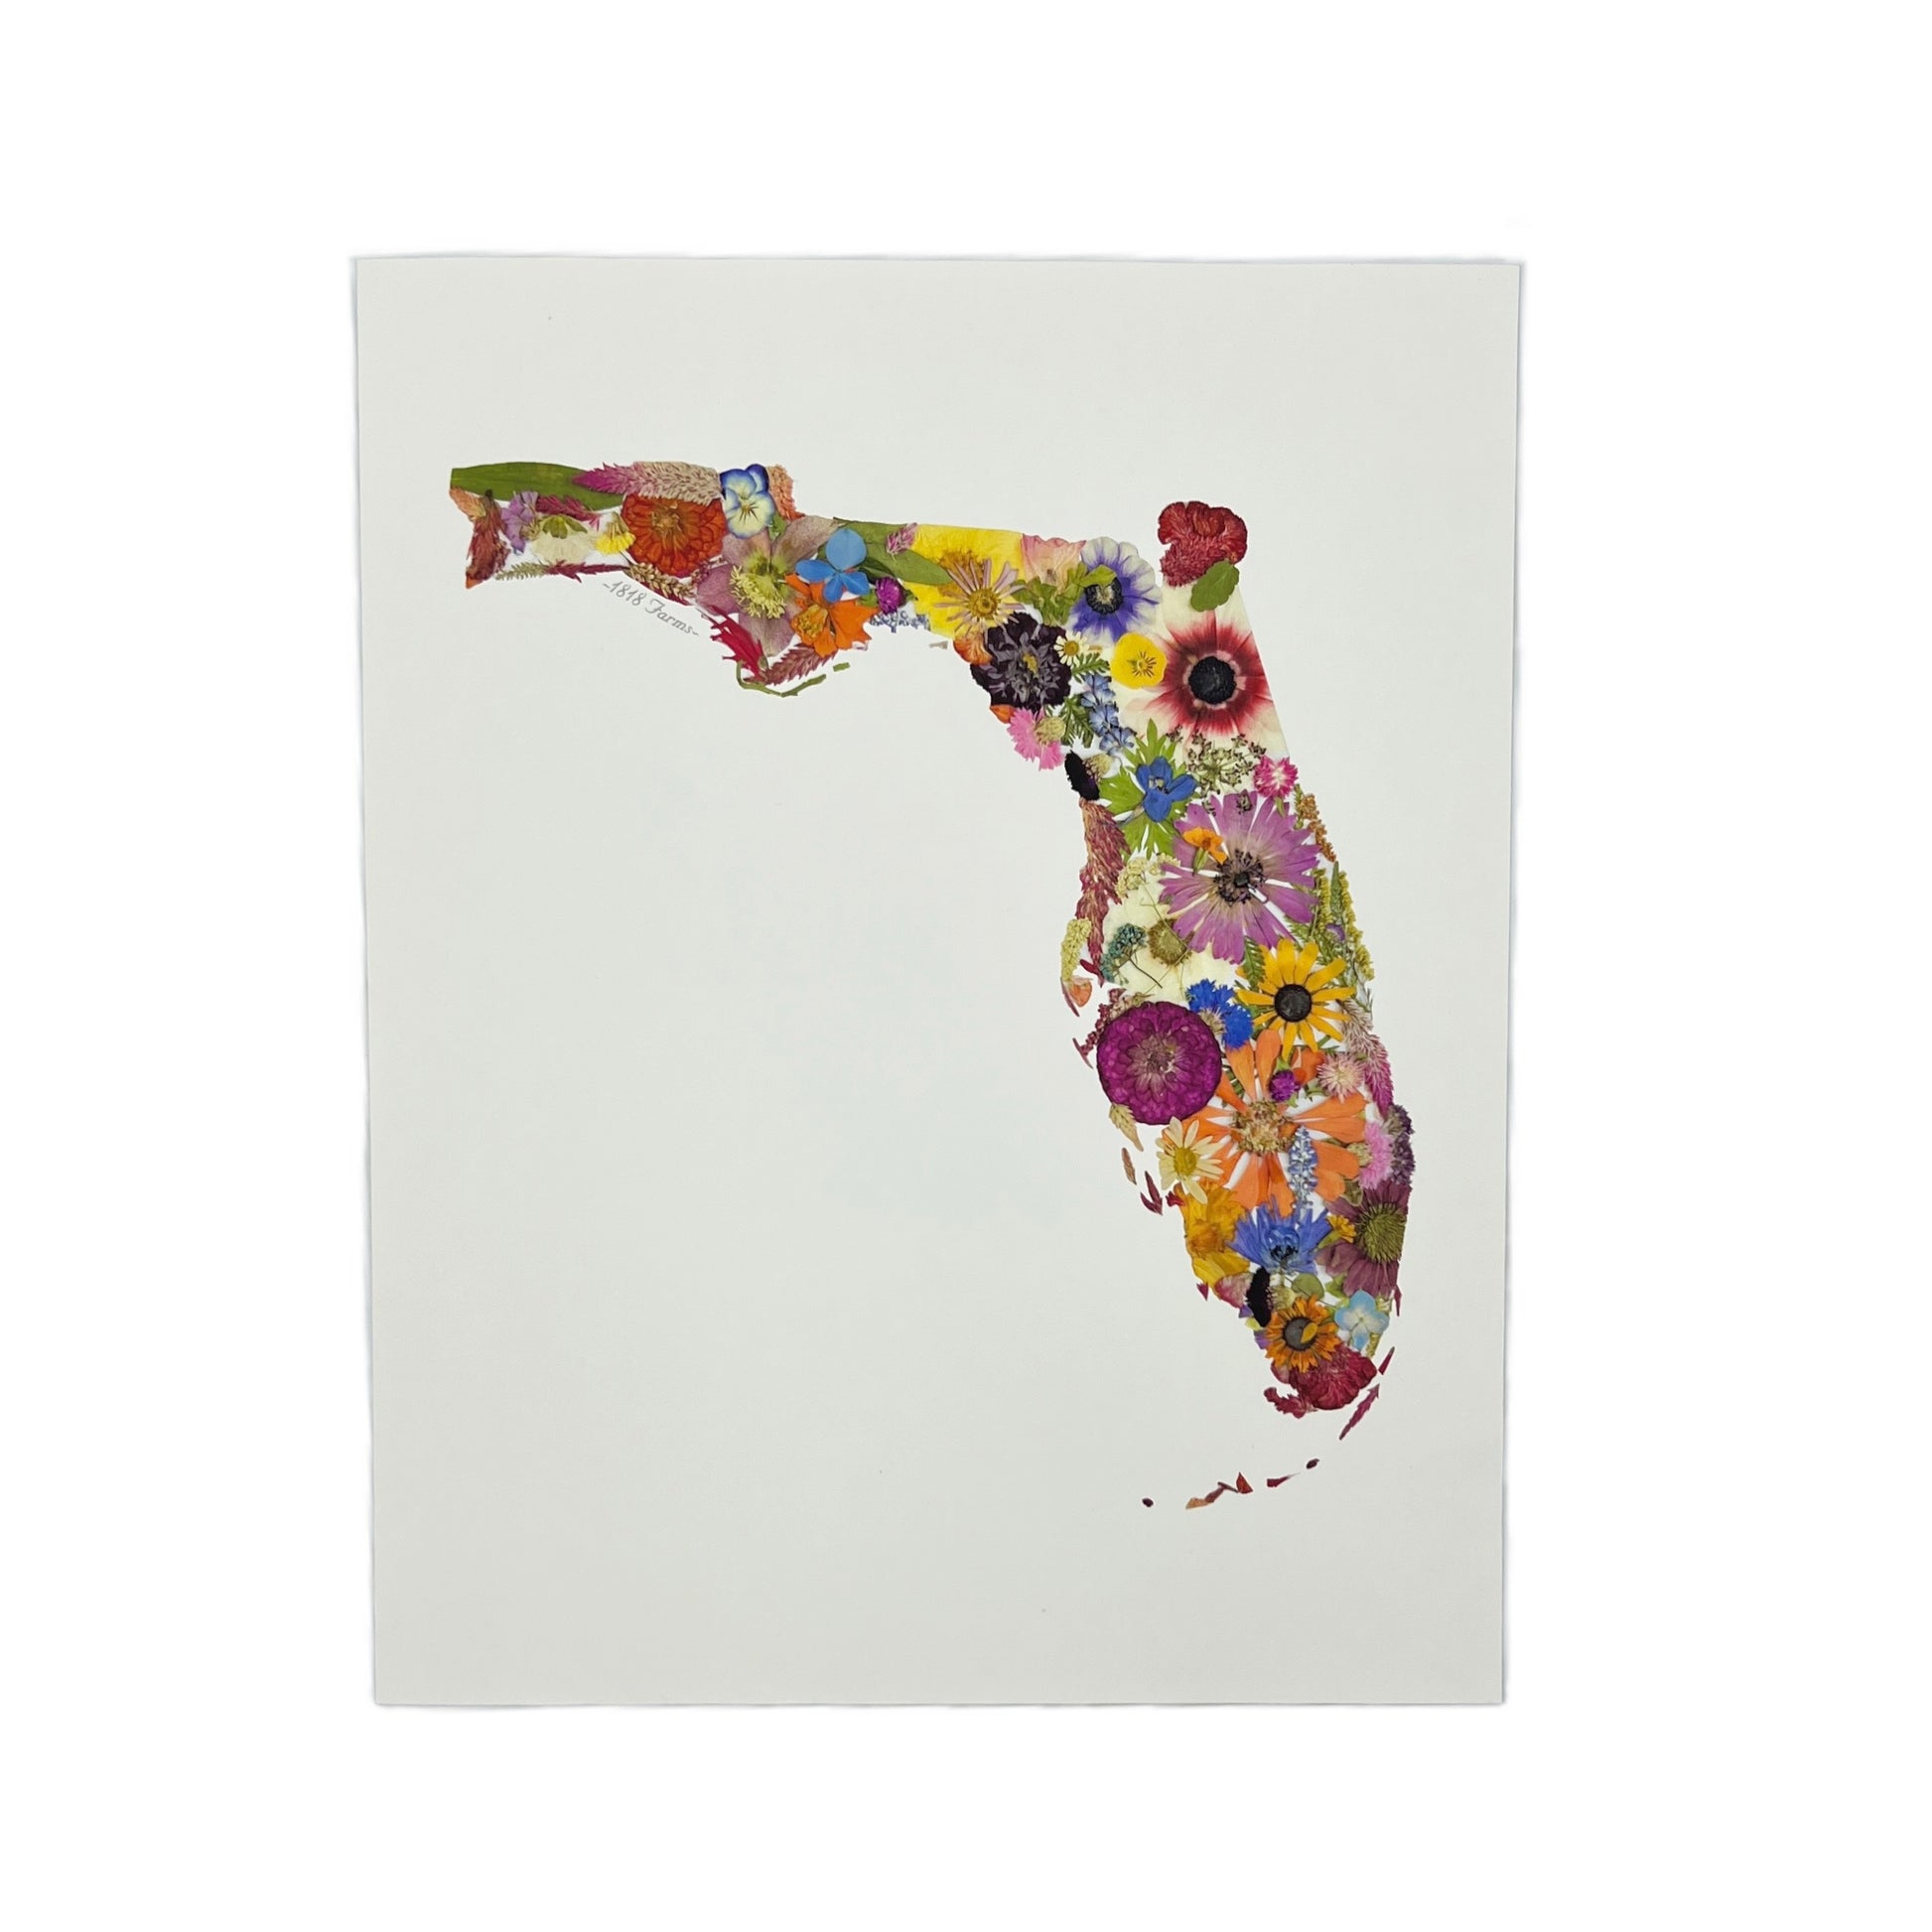 Florida Themed Giclée Print Featuring Dried, Pressed Flowers - "Where I Bloom" Collection Giclee Art Print 1818 Farms   